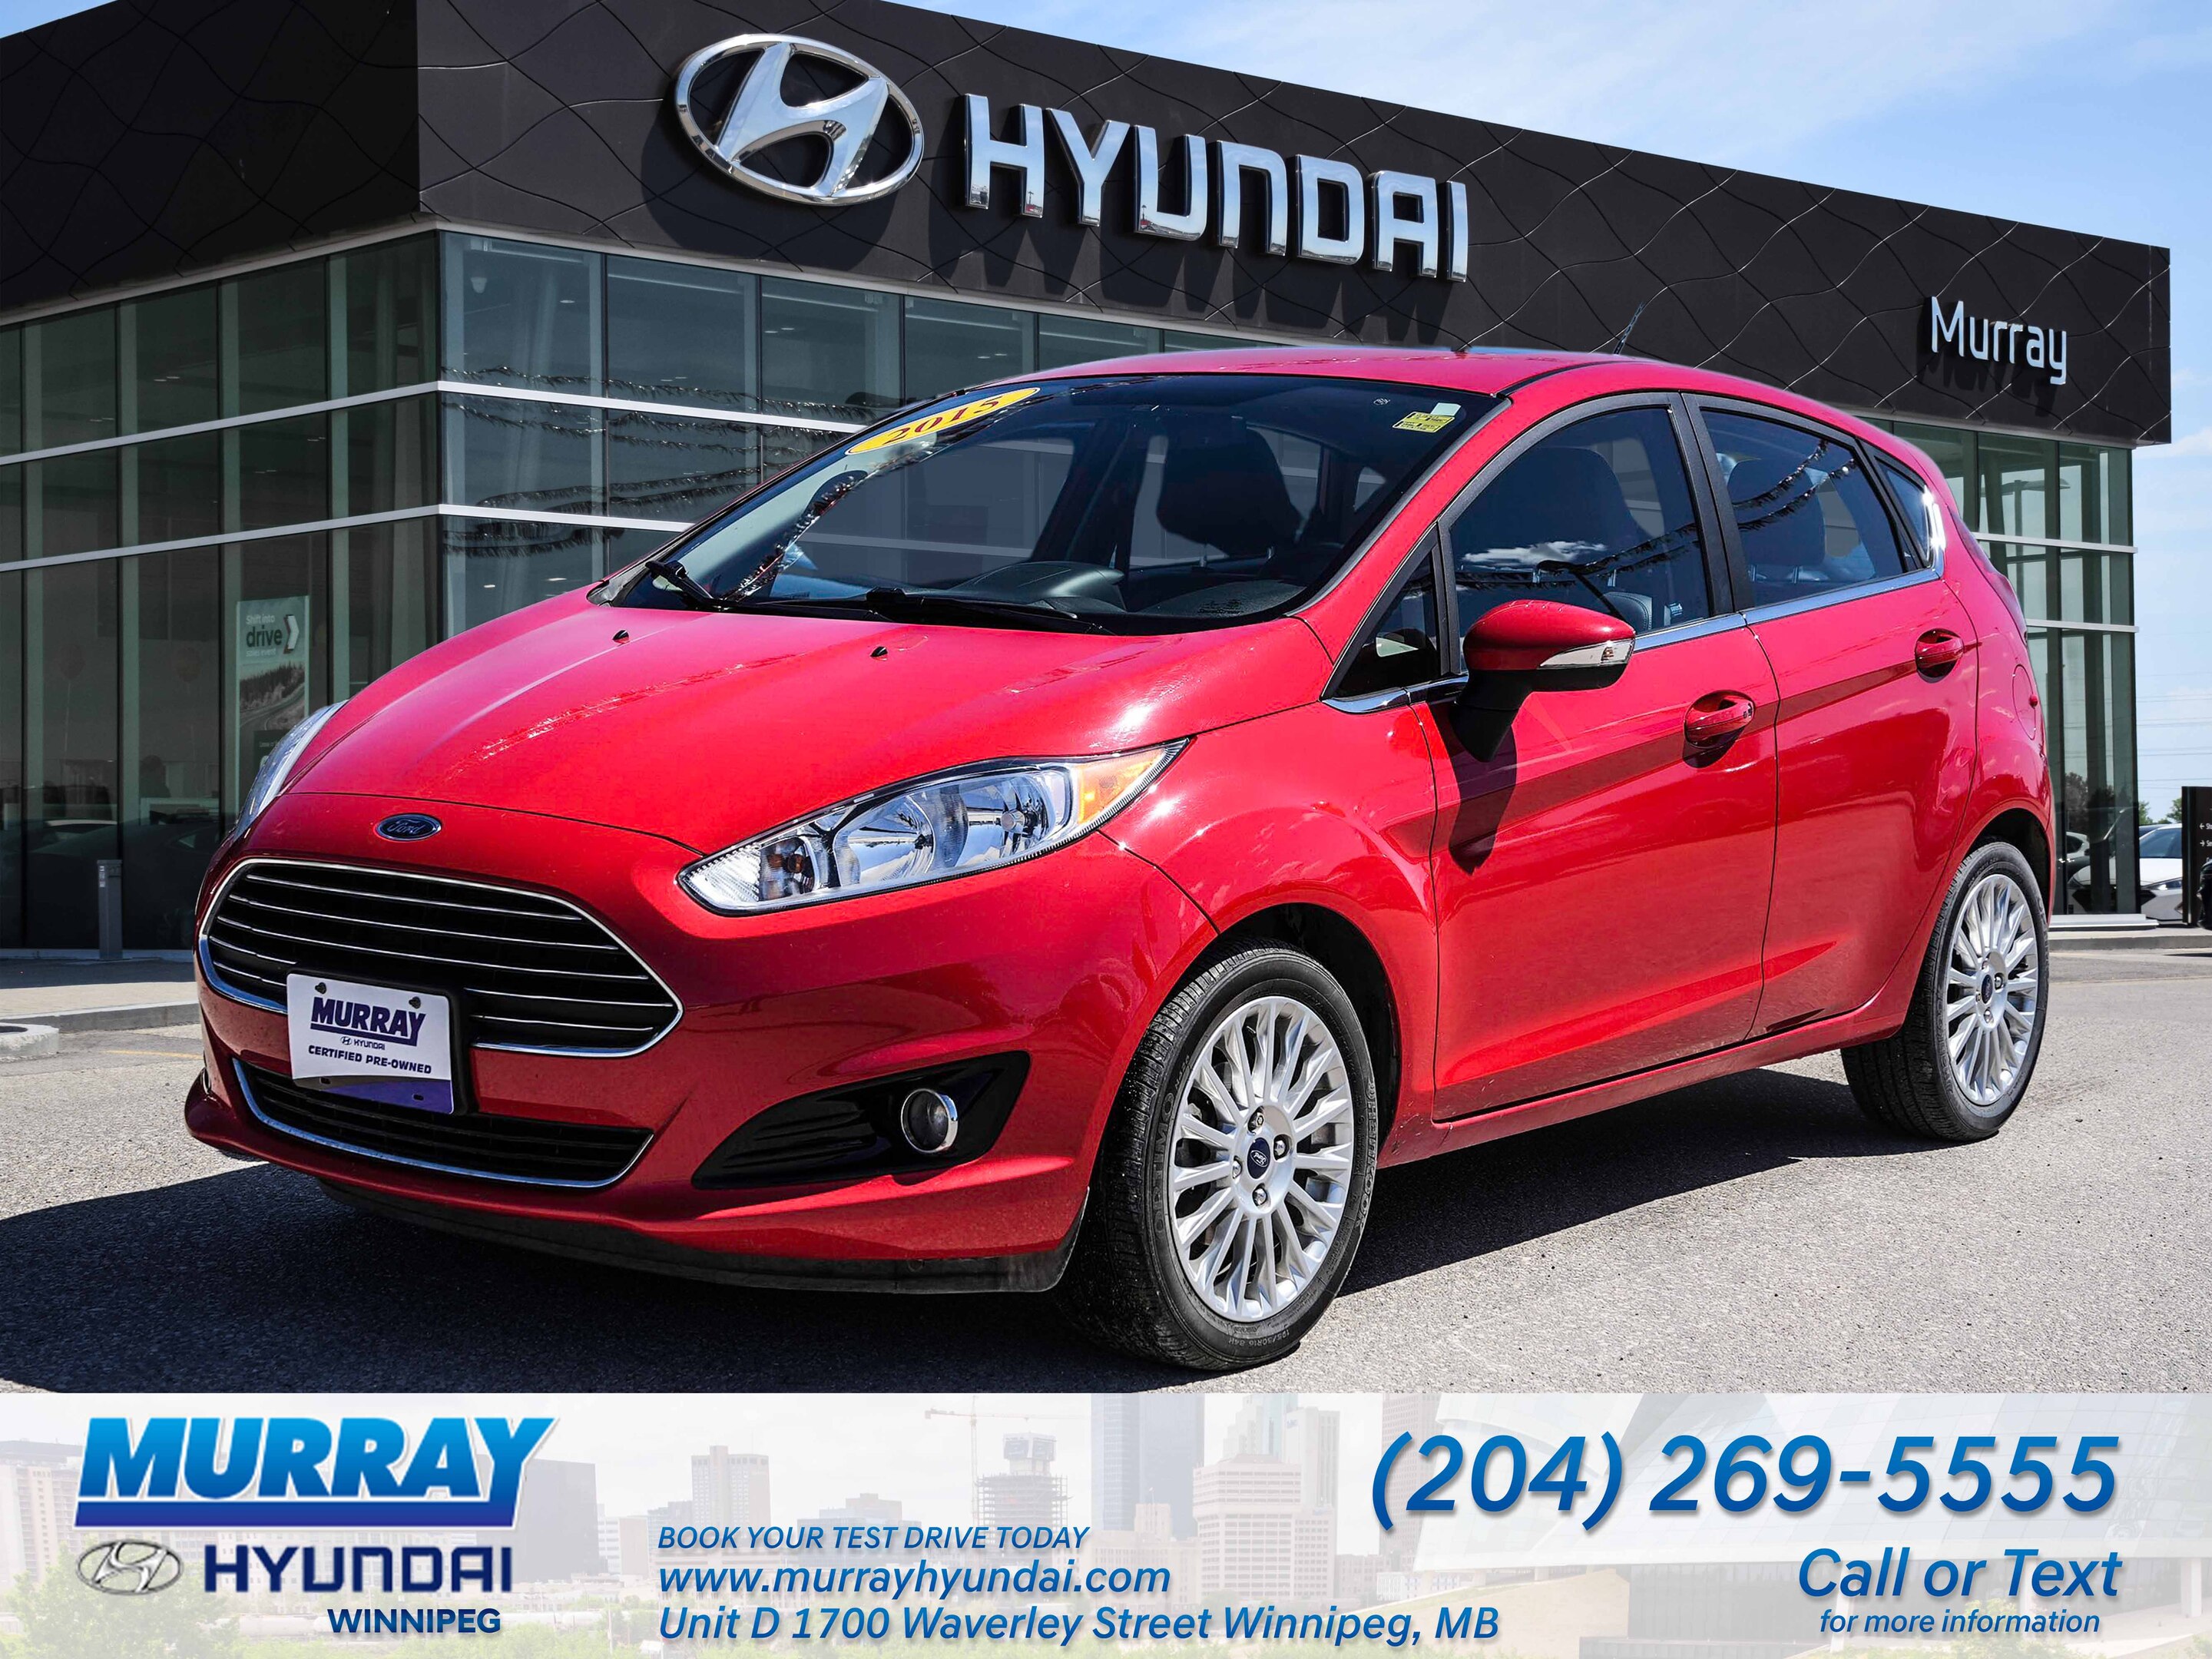 2015 Ford Fiesta Titanium Hatchback with Sunroof and Backup Camera